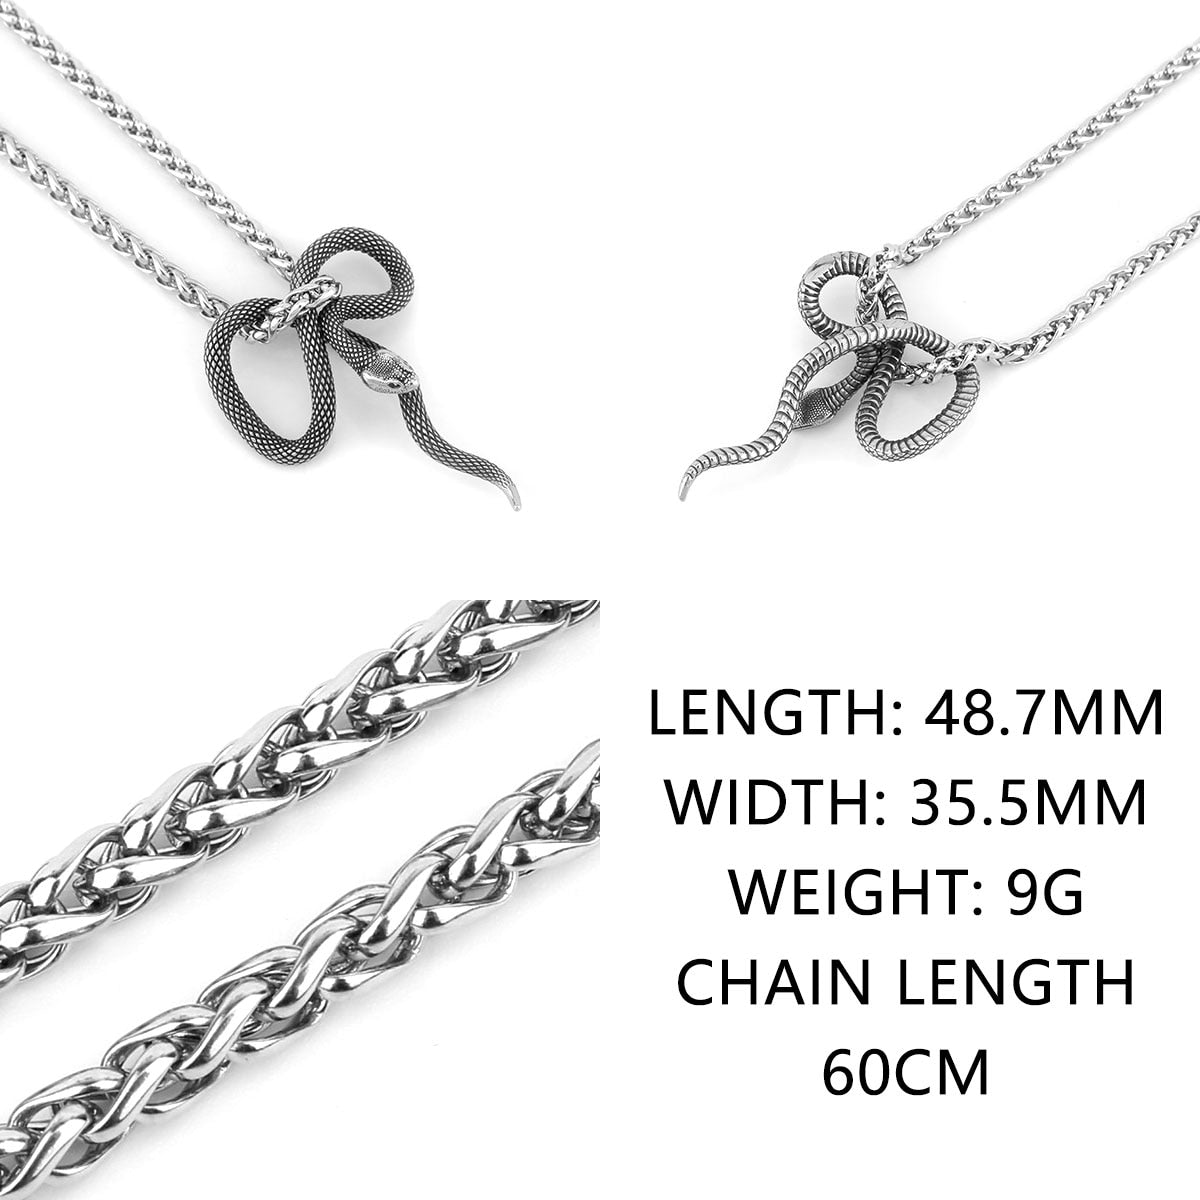 Gothic Snake King Necklace Men's Hip Hop Punk Biker Pendant Necklace Retro Charm Stainless Steel Ma'le Jewelry Free Shipping